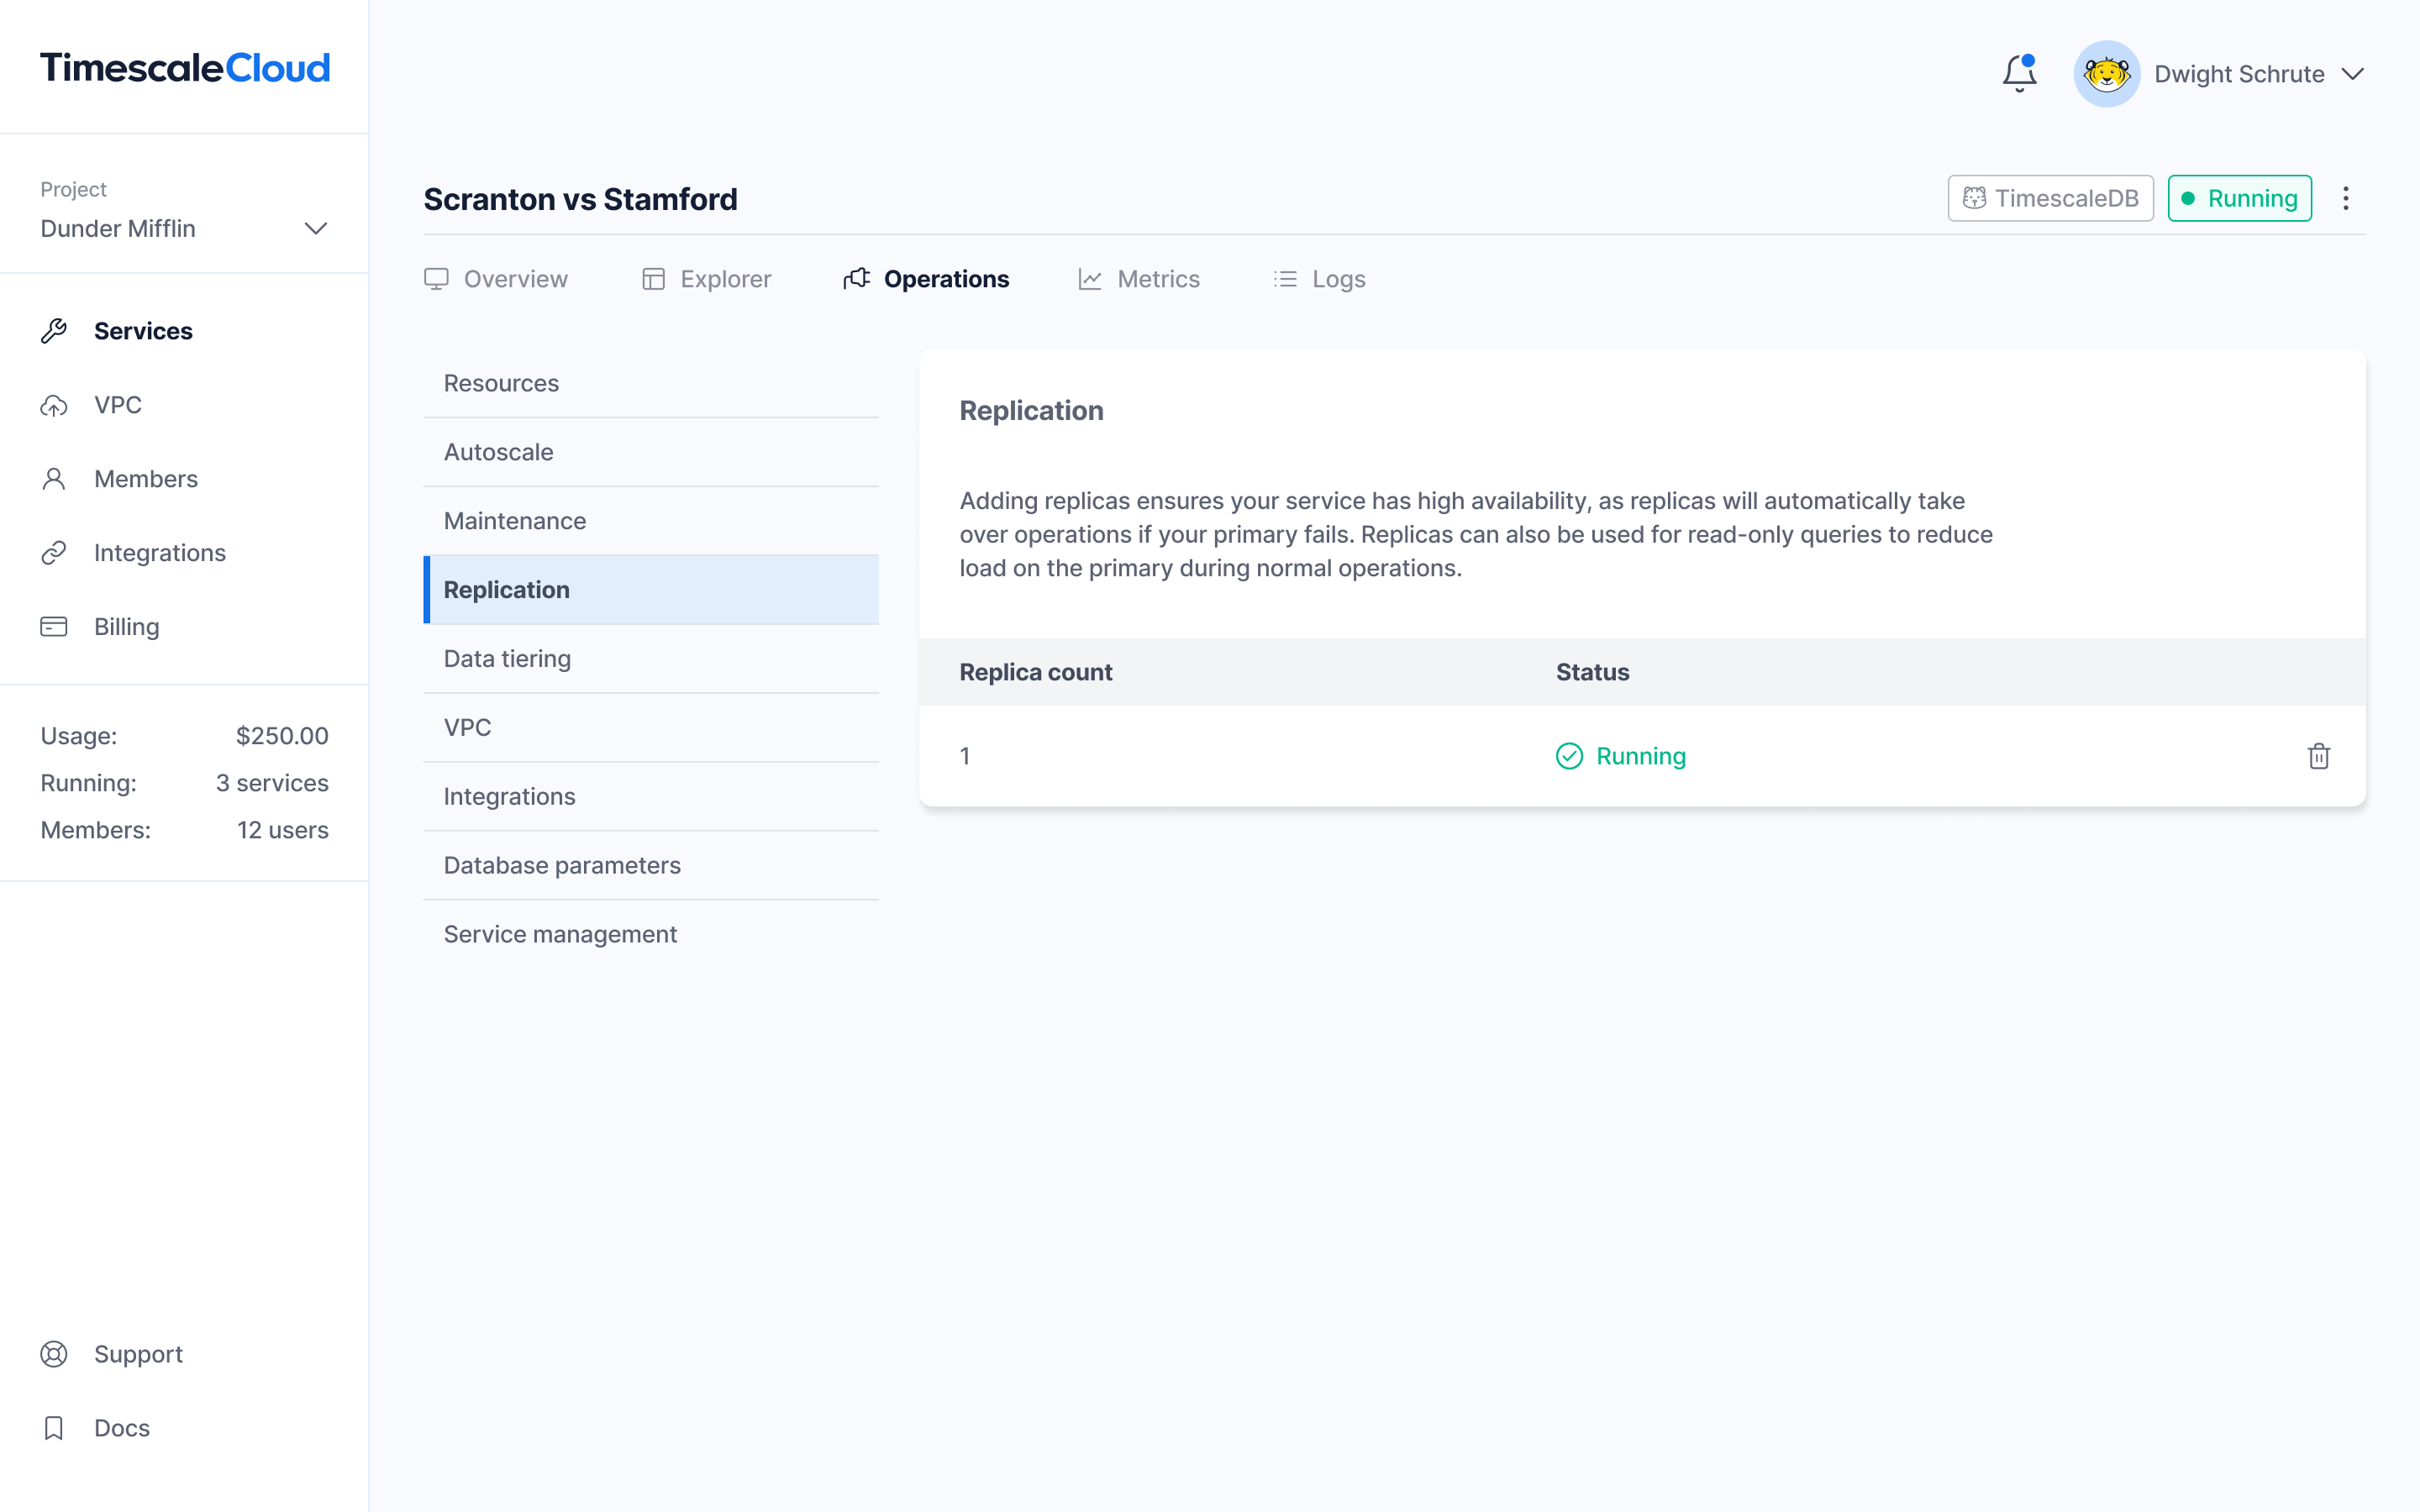 The Replication page of the new Timescale Cloud UI—built for a better developer experience